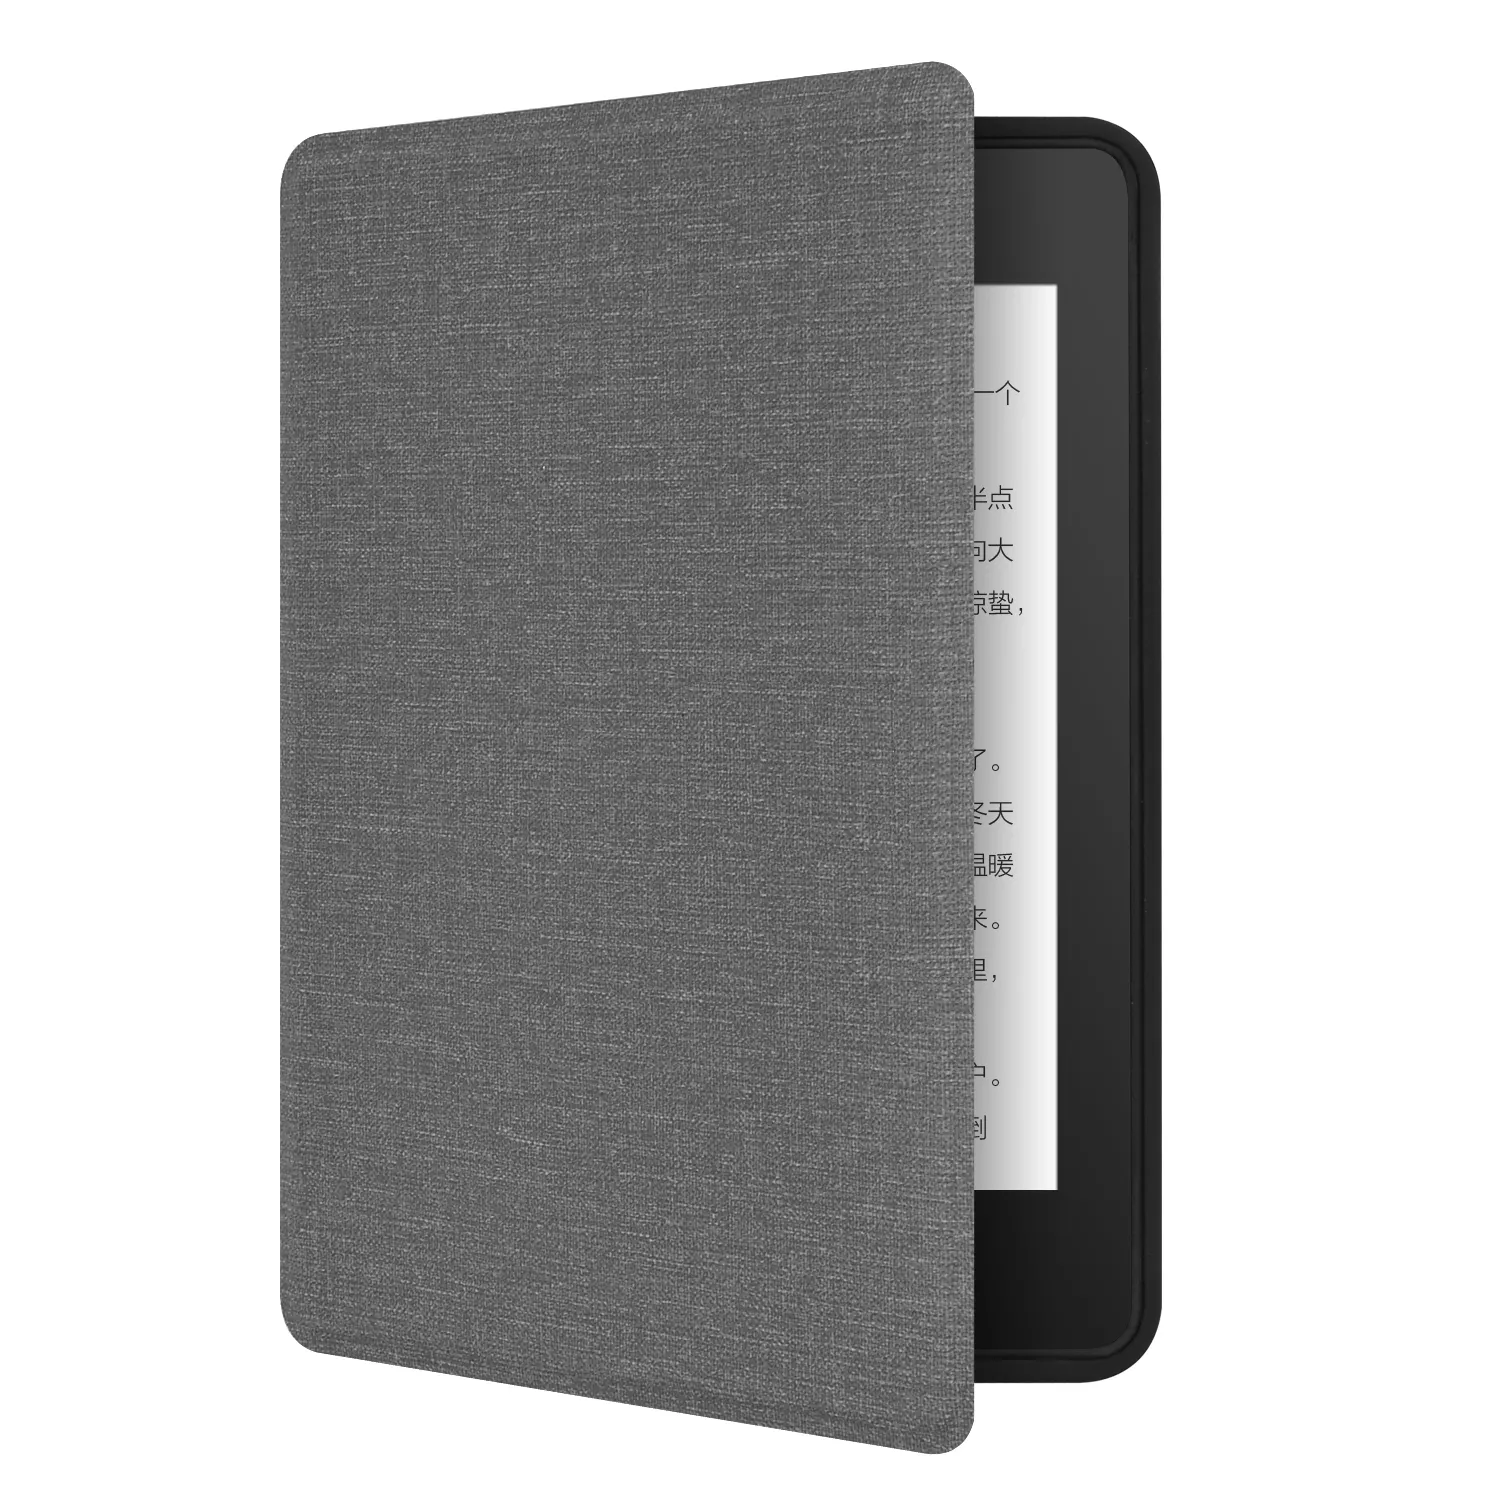 Cloth Grain Soft TPU Bottom Hand Strap Cover For Kindle Paperwhite 11th Generation Cover Kindle Paperwhite 5 Case